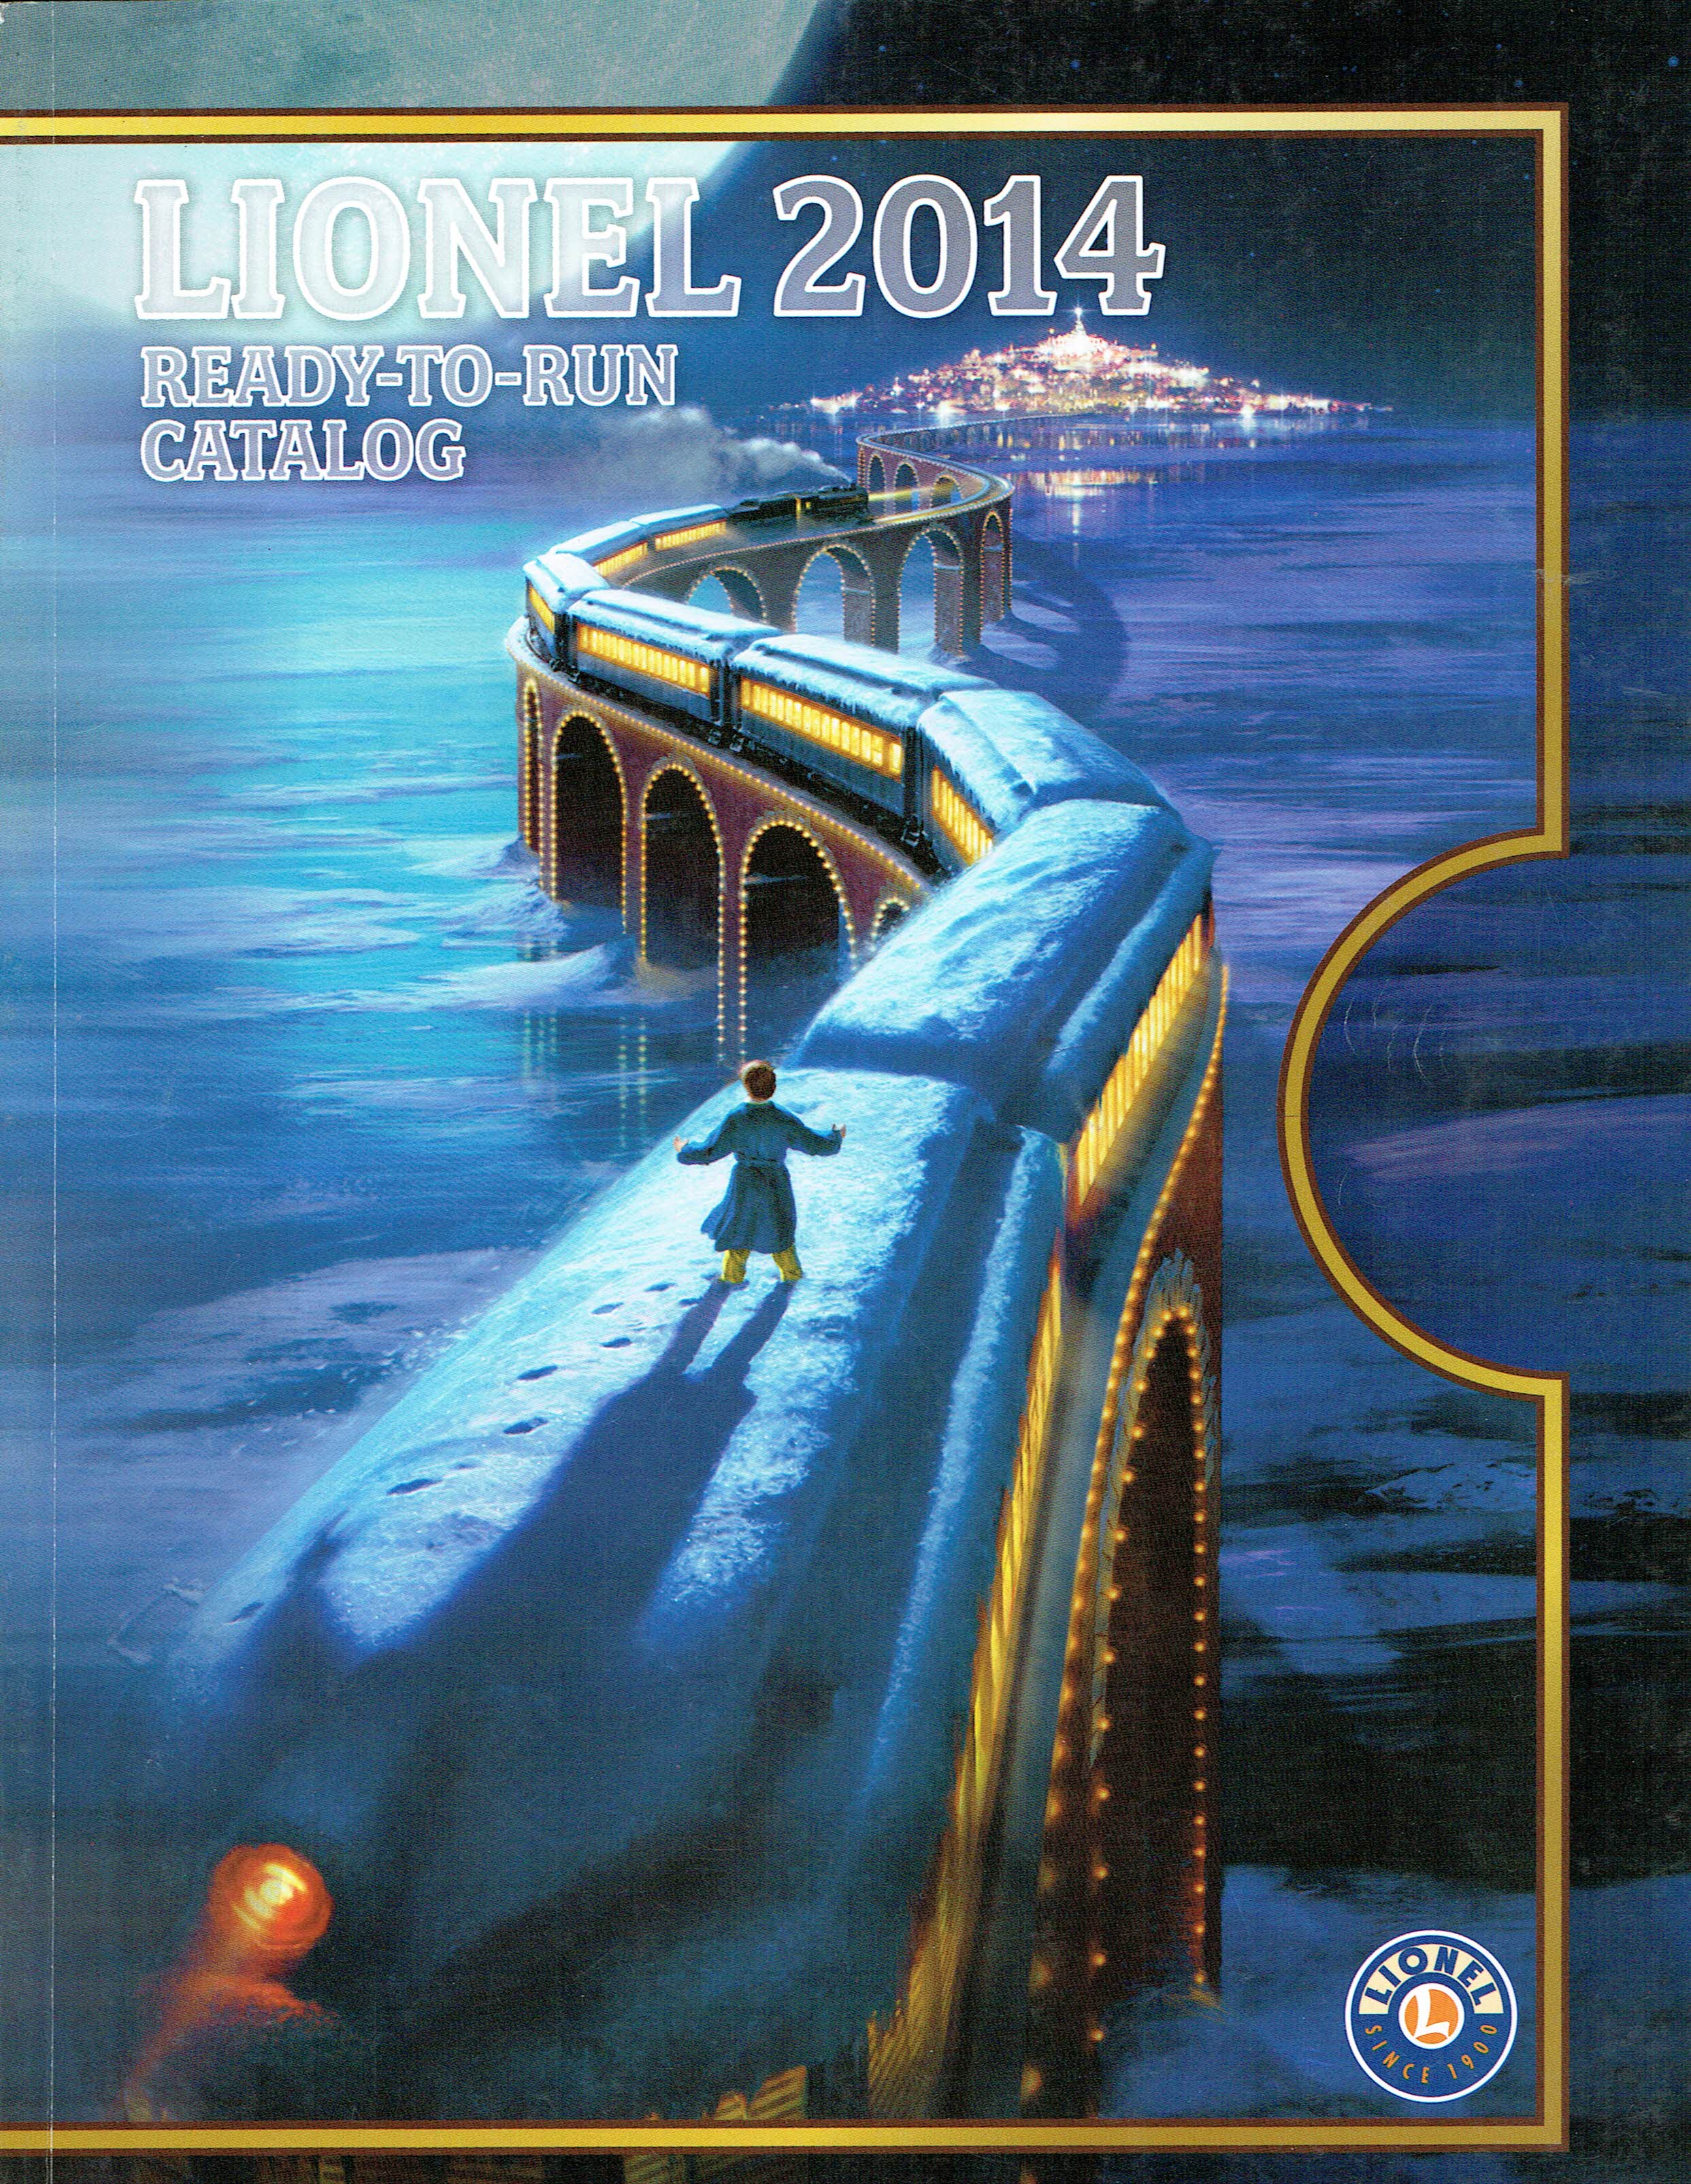 Lionel 2014 Ready-to-Run Catalog image